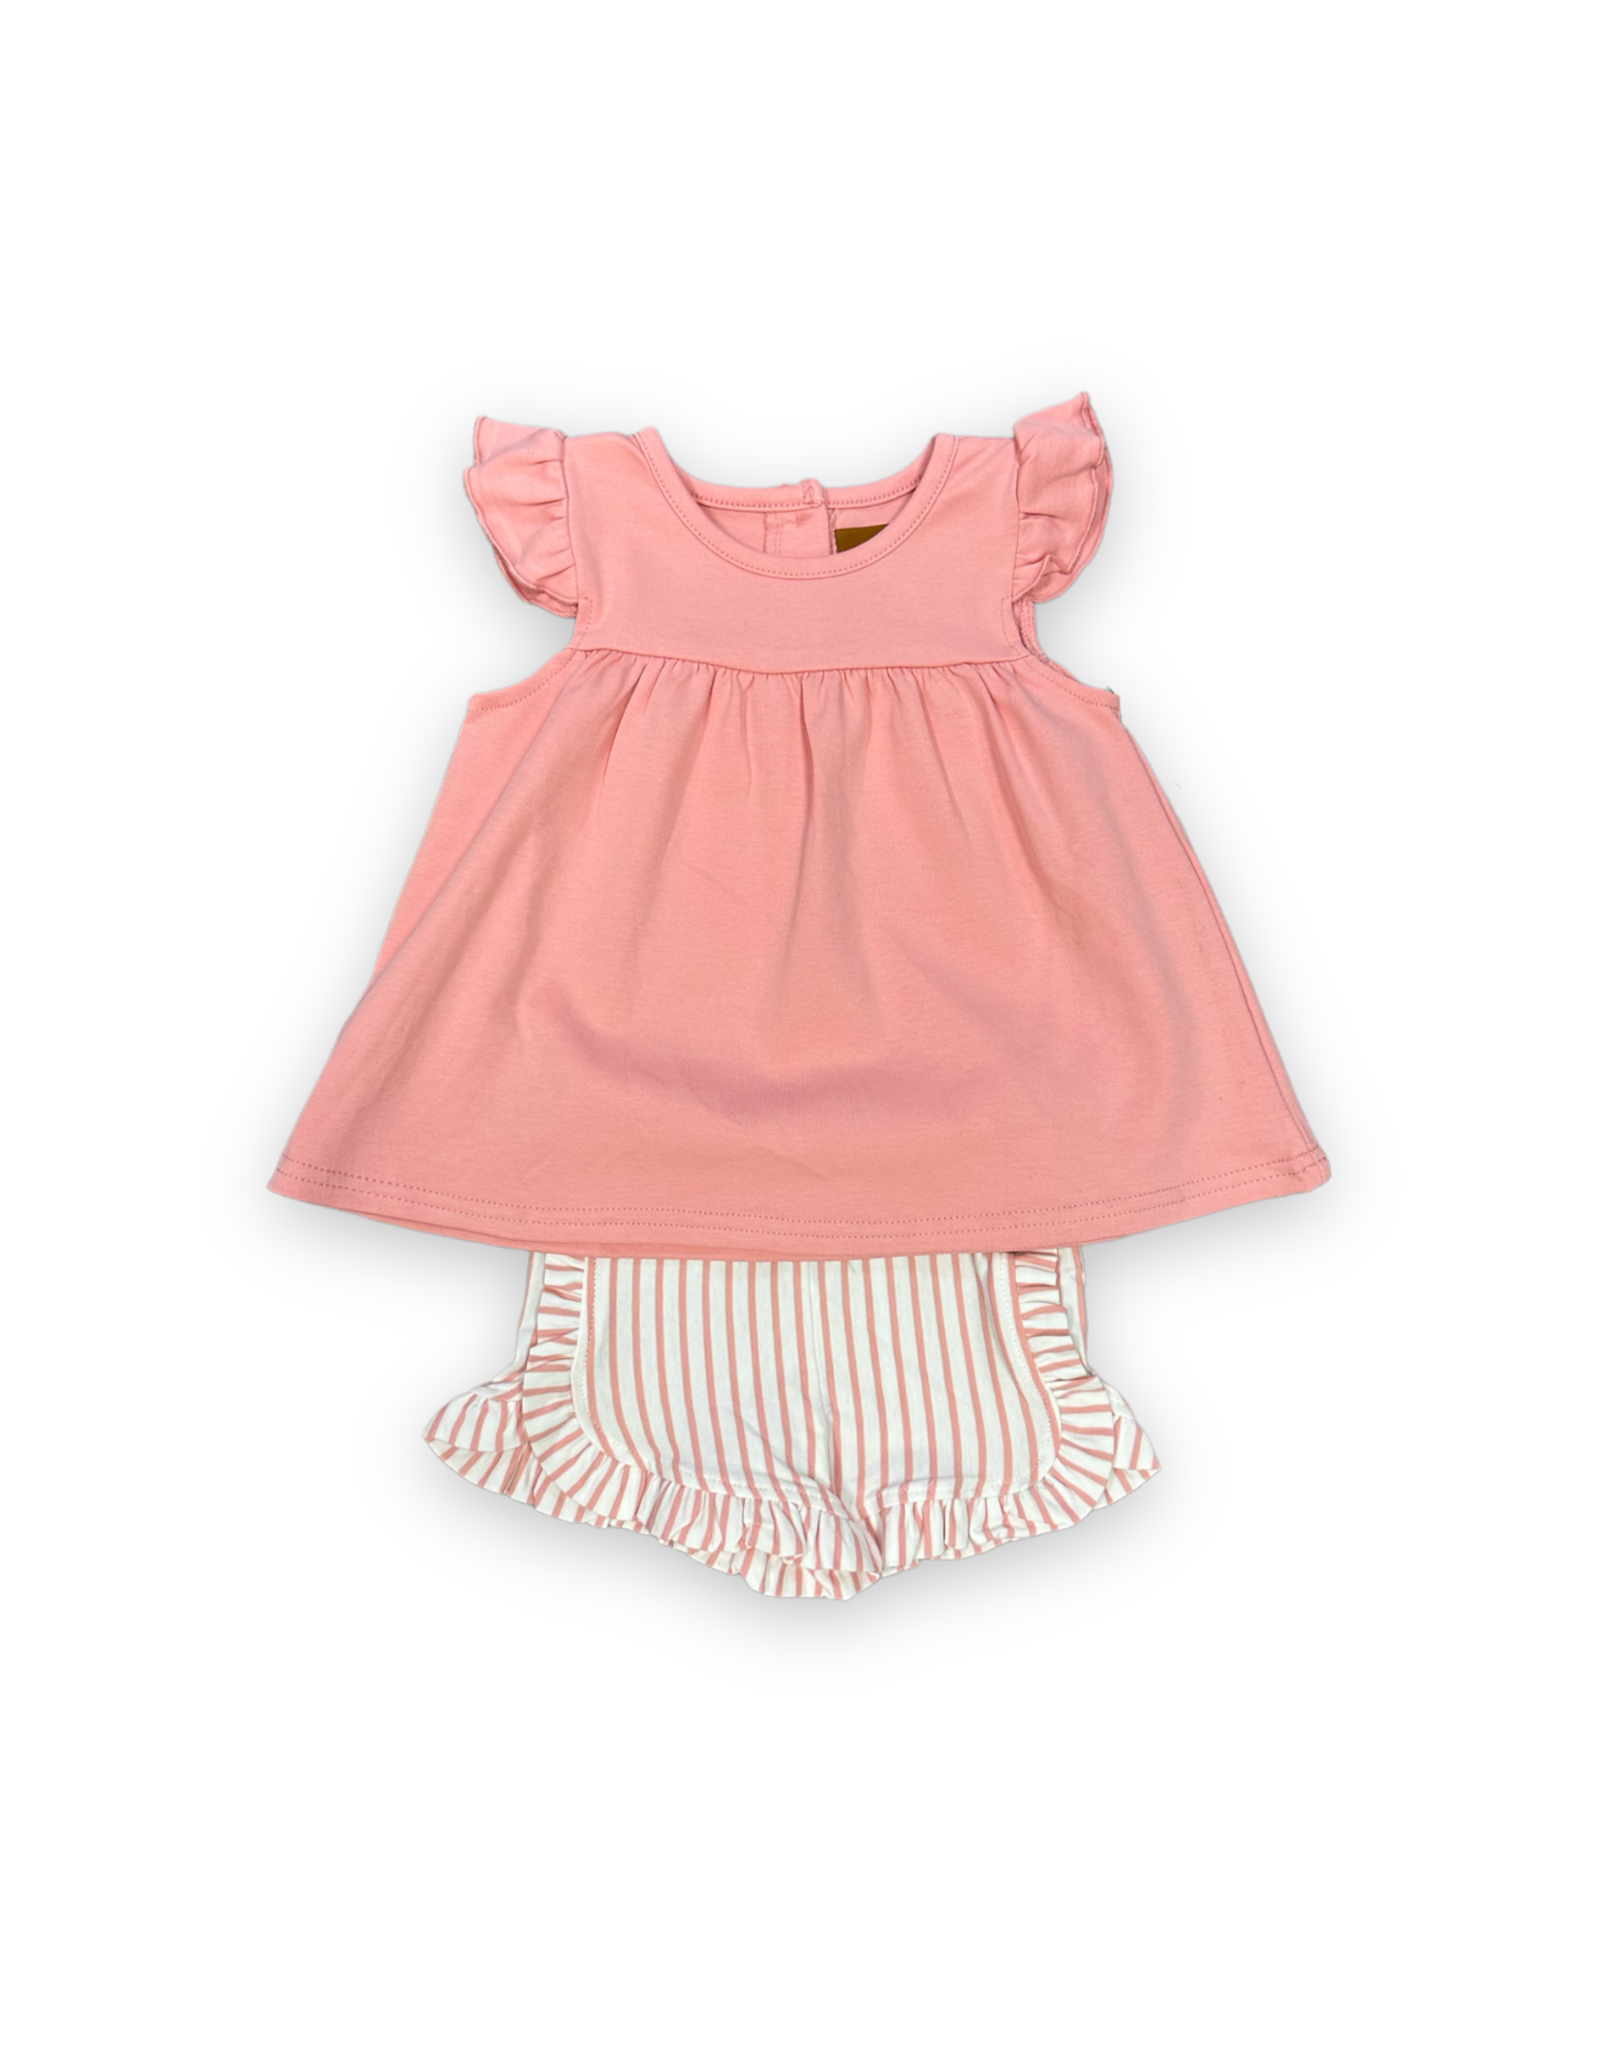 Millie Jay Millie Jay- Finley A/S Short Set: Coral